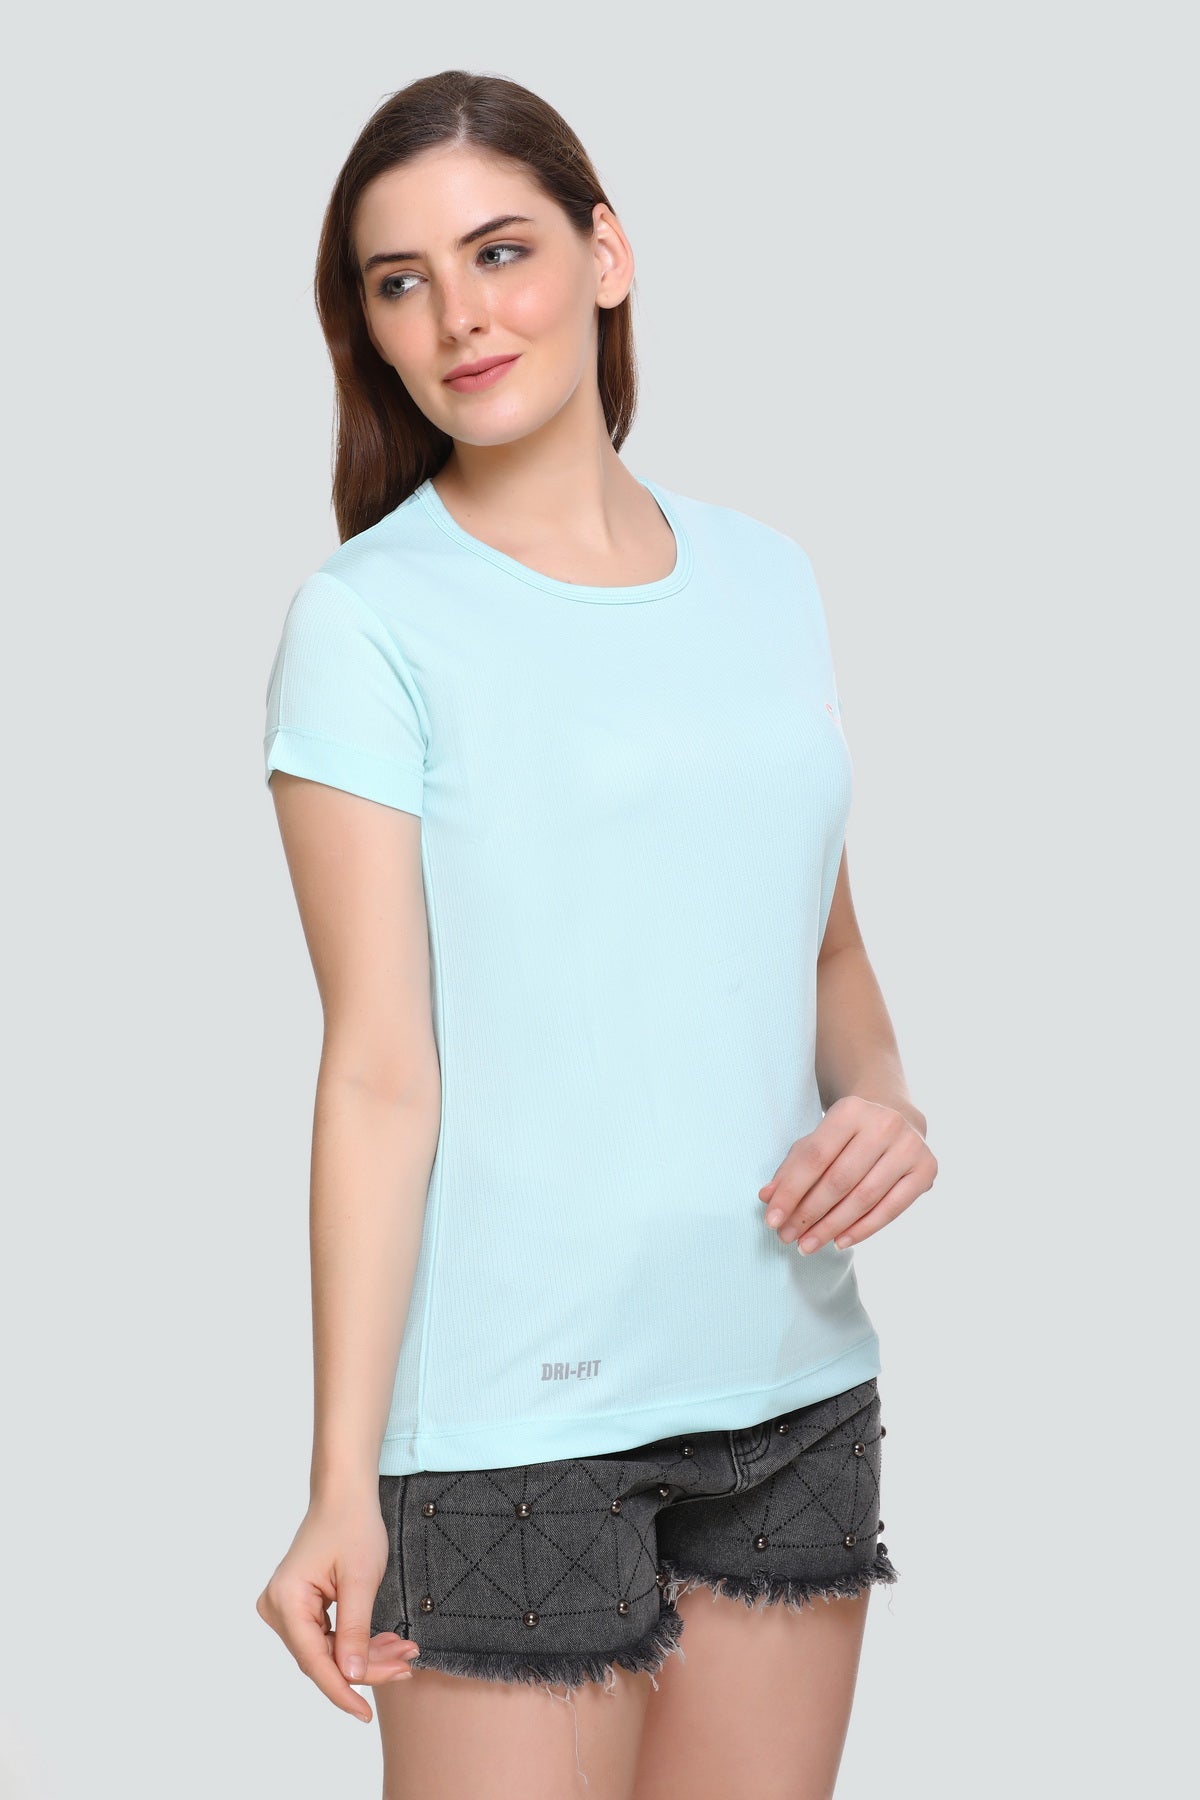 Dri-Fit T-Shirts For Women Half Sleeves Activewear - Mint